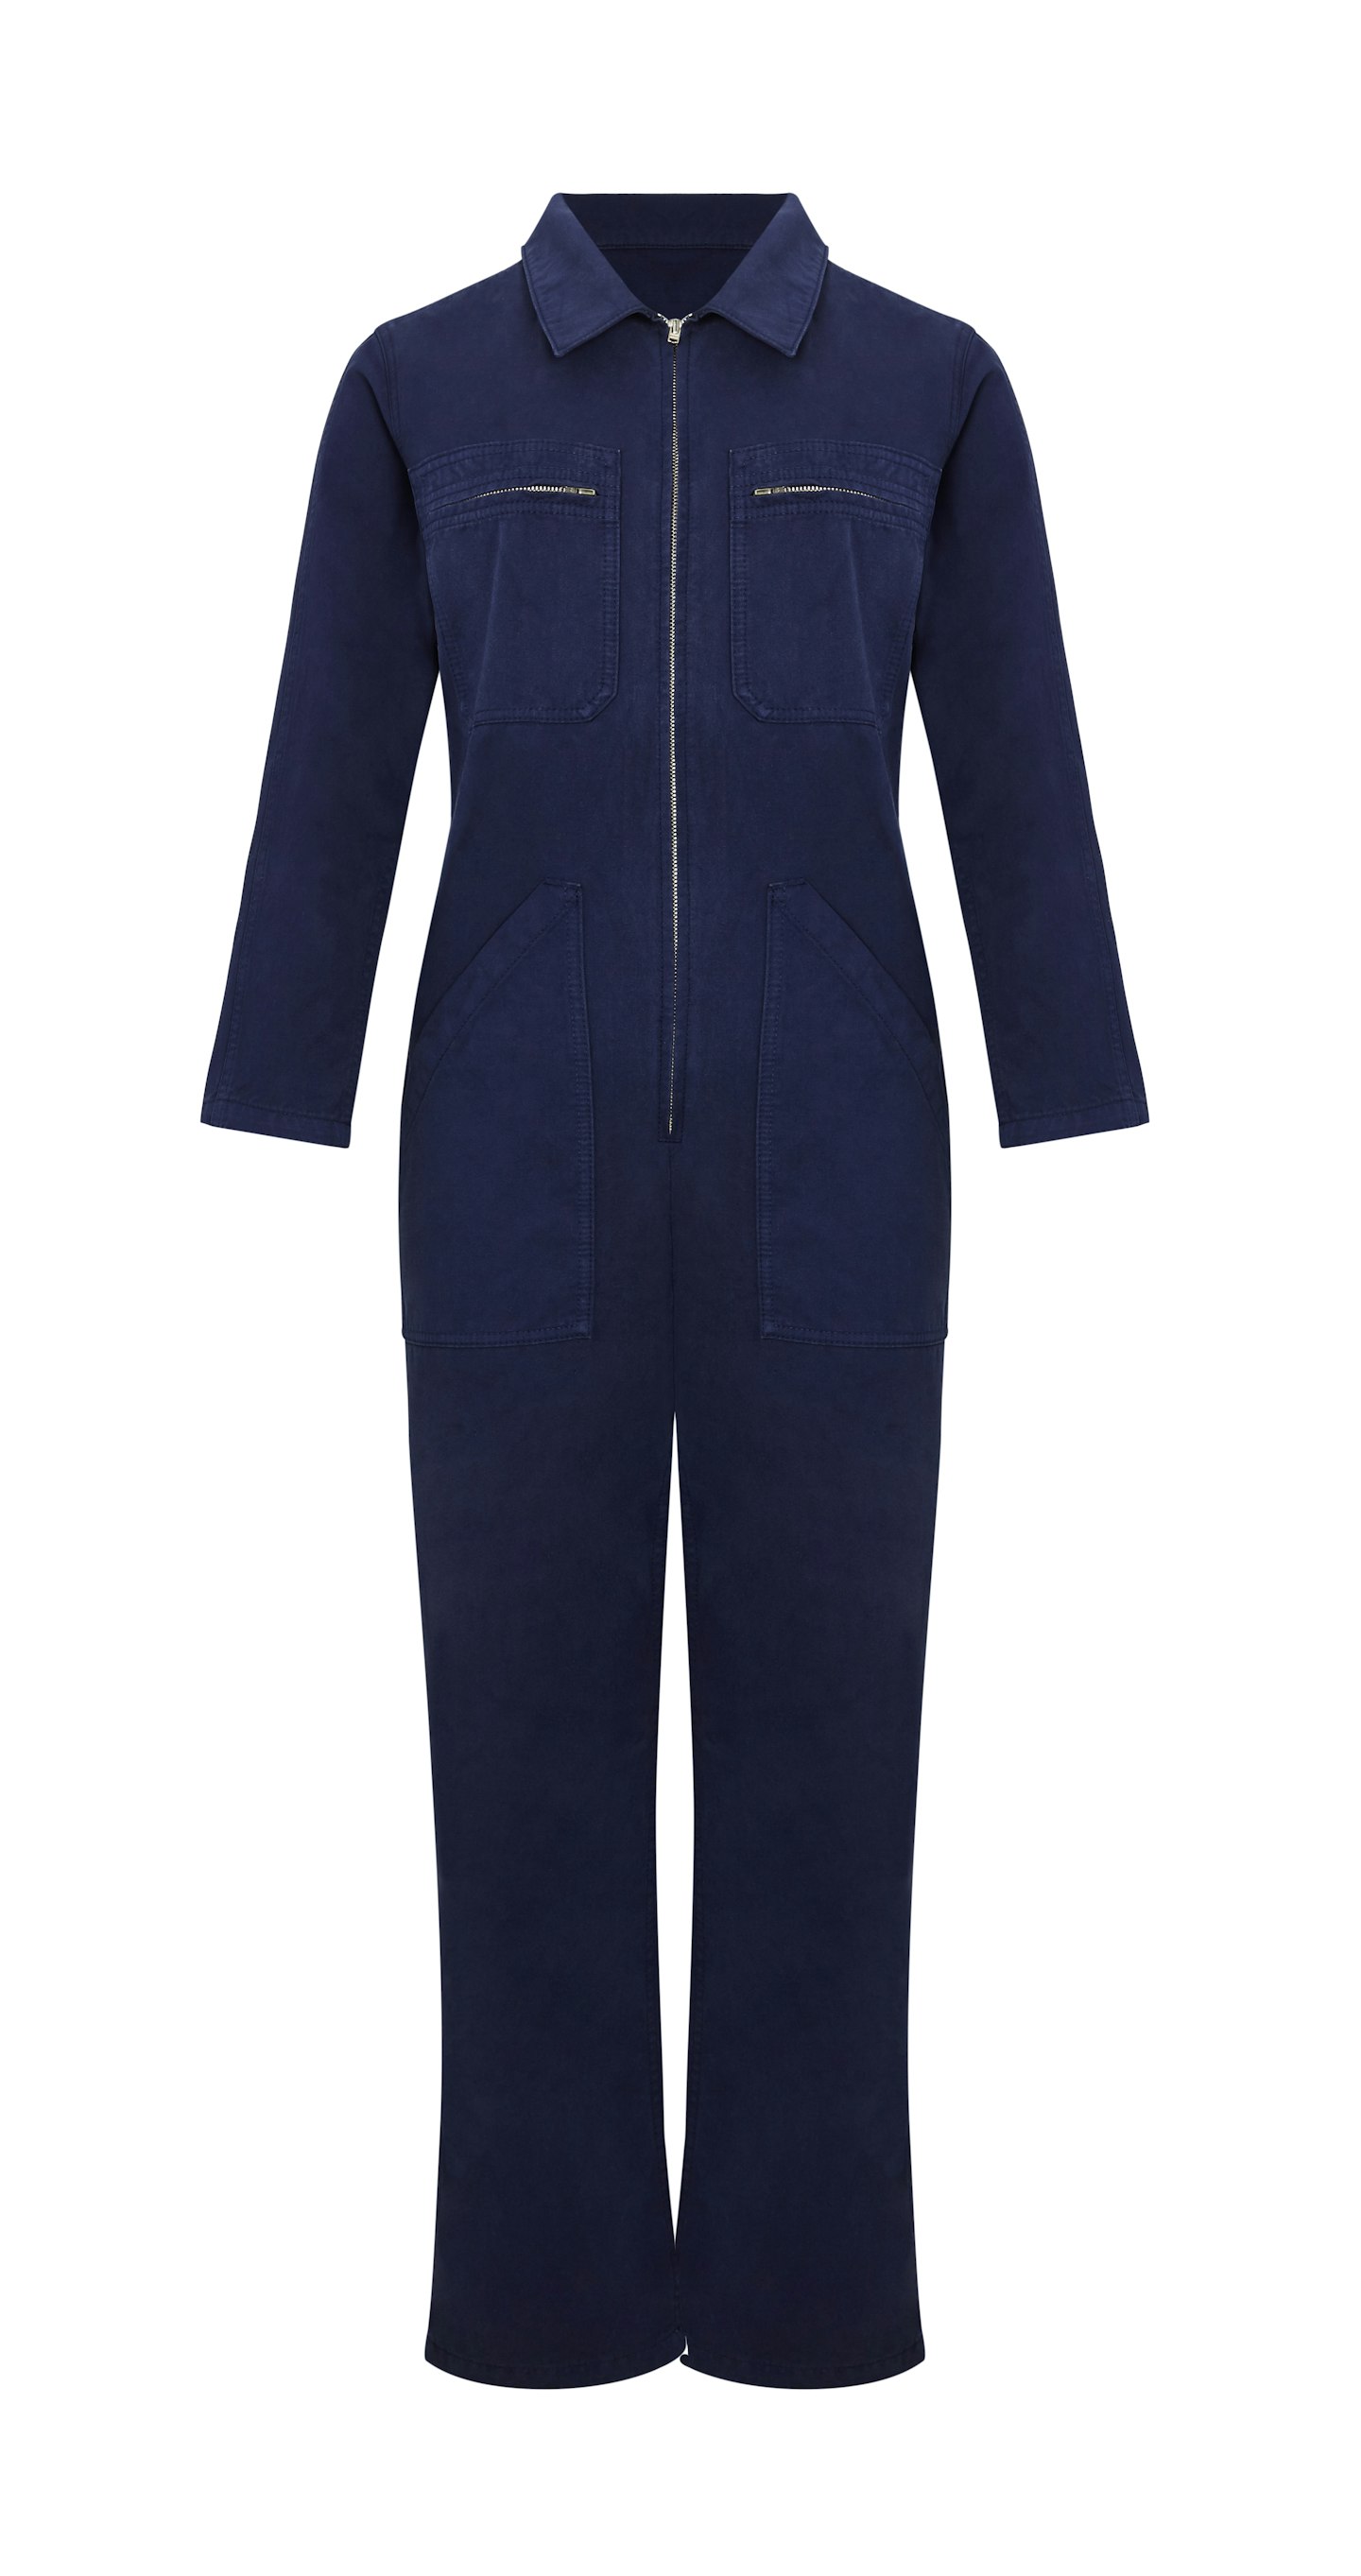 Holly Willoughby M&S Pure cotton utility jumpsuit, 55